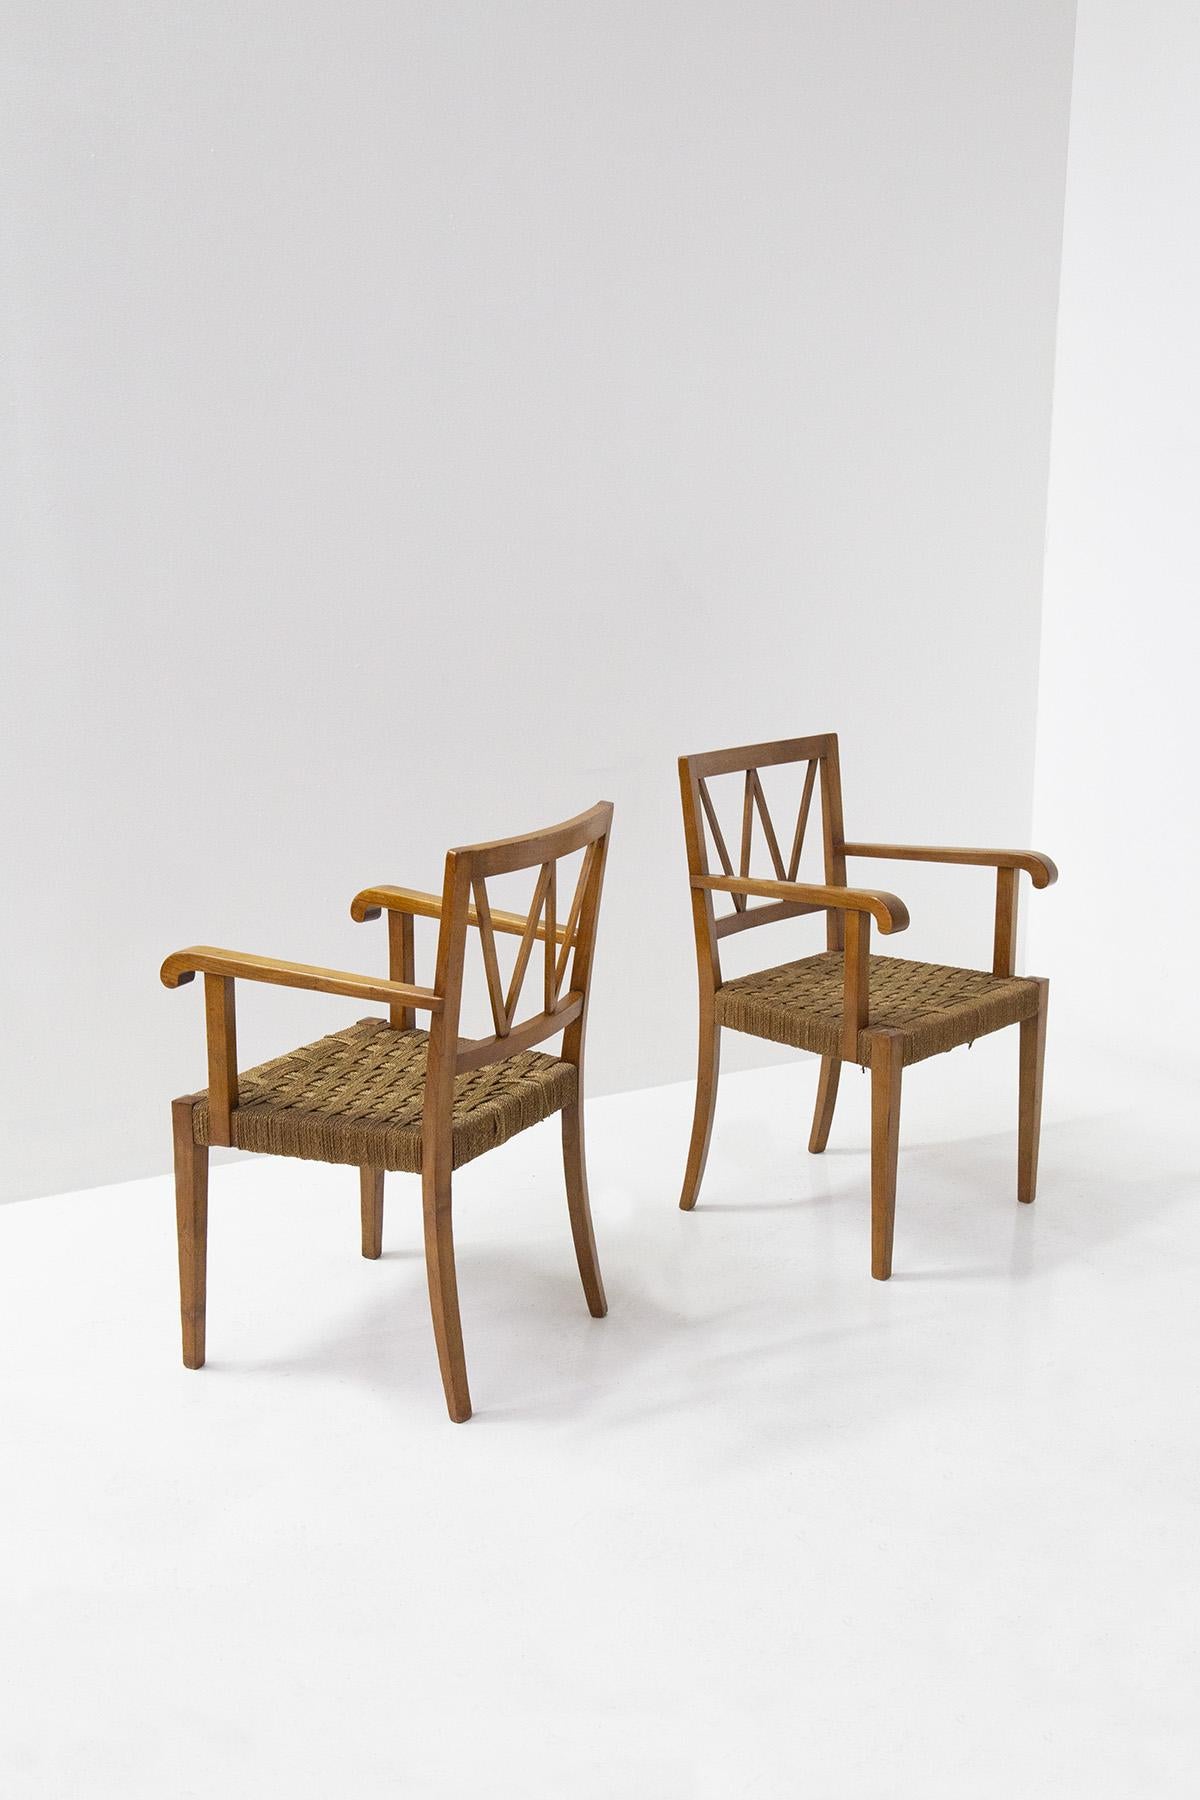 Great and very rare pair of armchairs by Paolo Buffa from the 1950s. The pair of armchairs is made of walnut wood, with elegant geometric markings present in their backs. In fact, the backrests are made with crisscrossed lath rods that form an